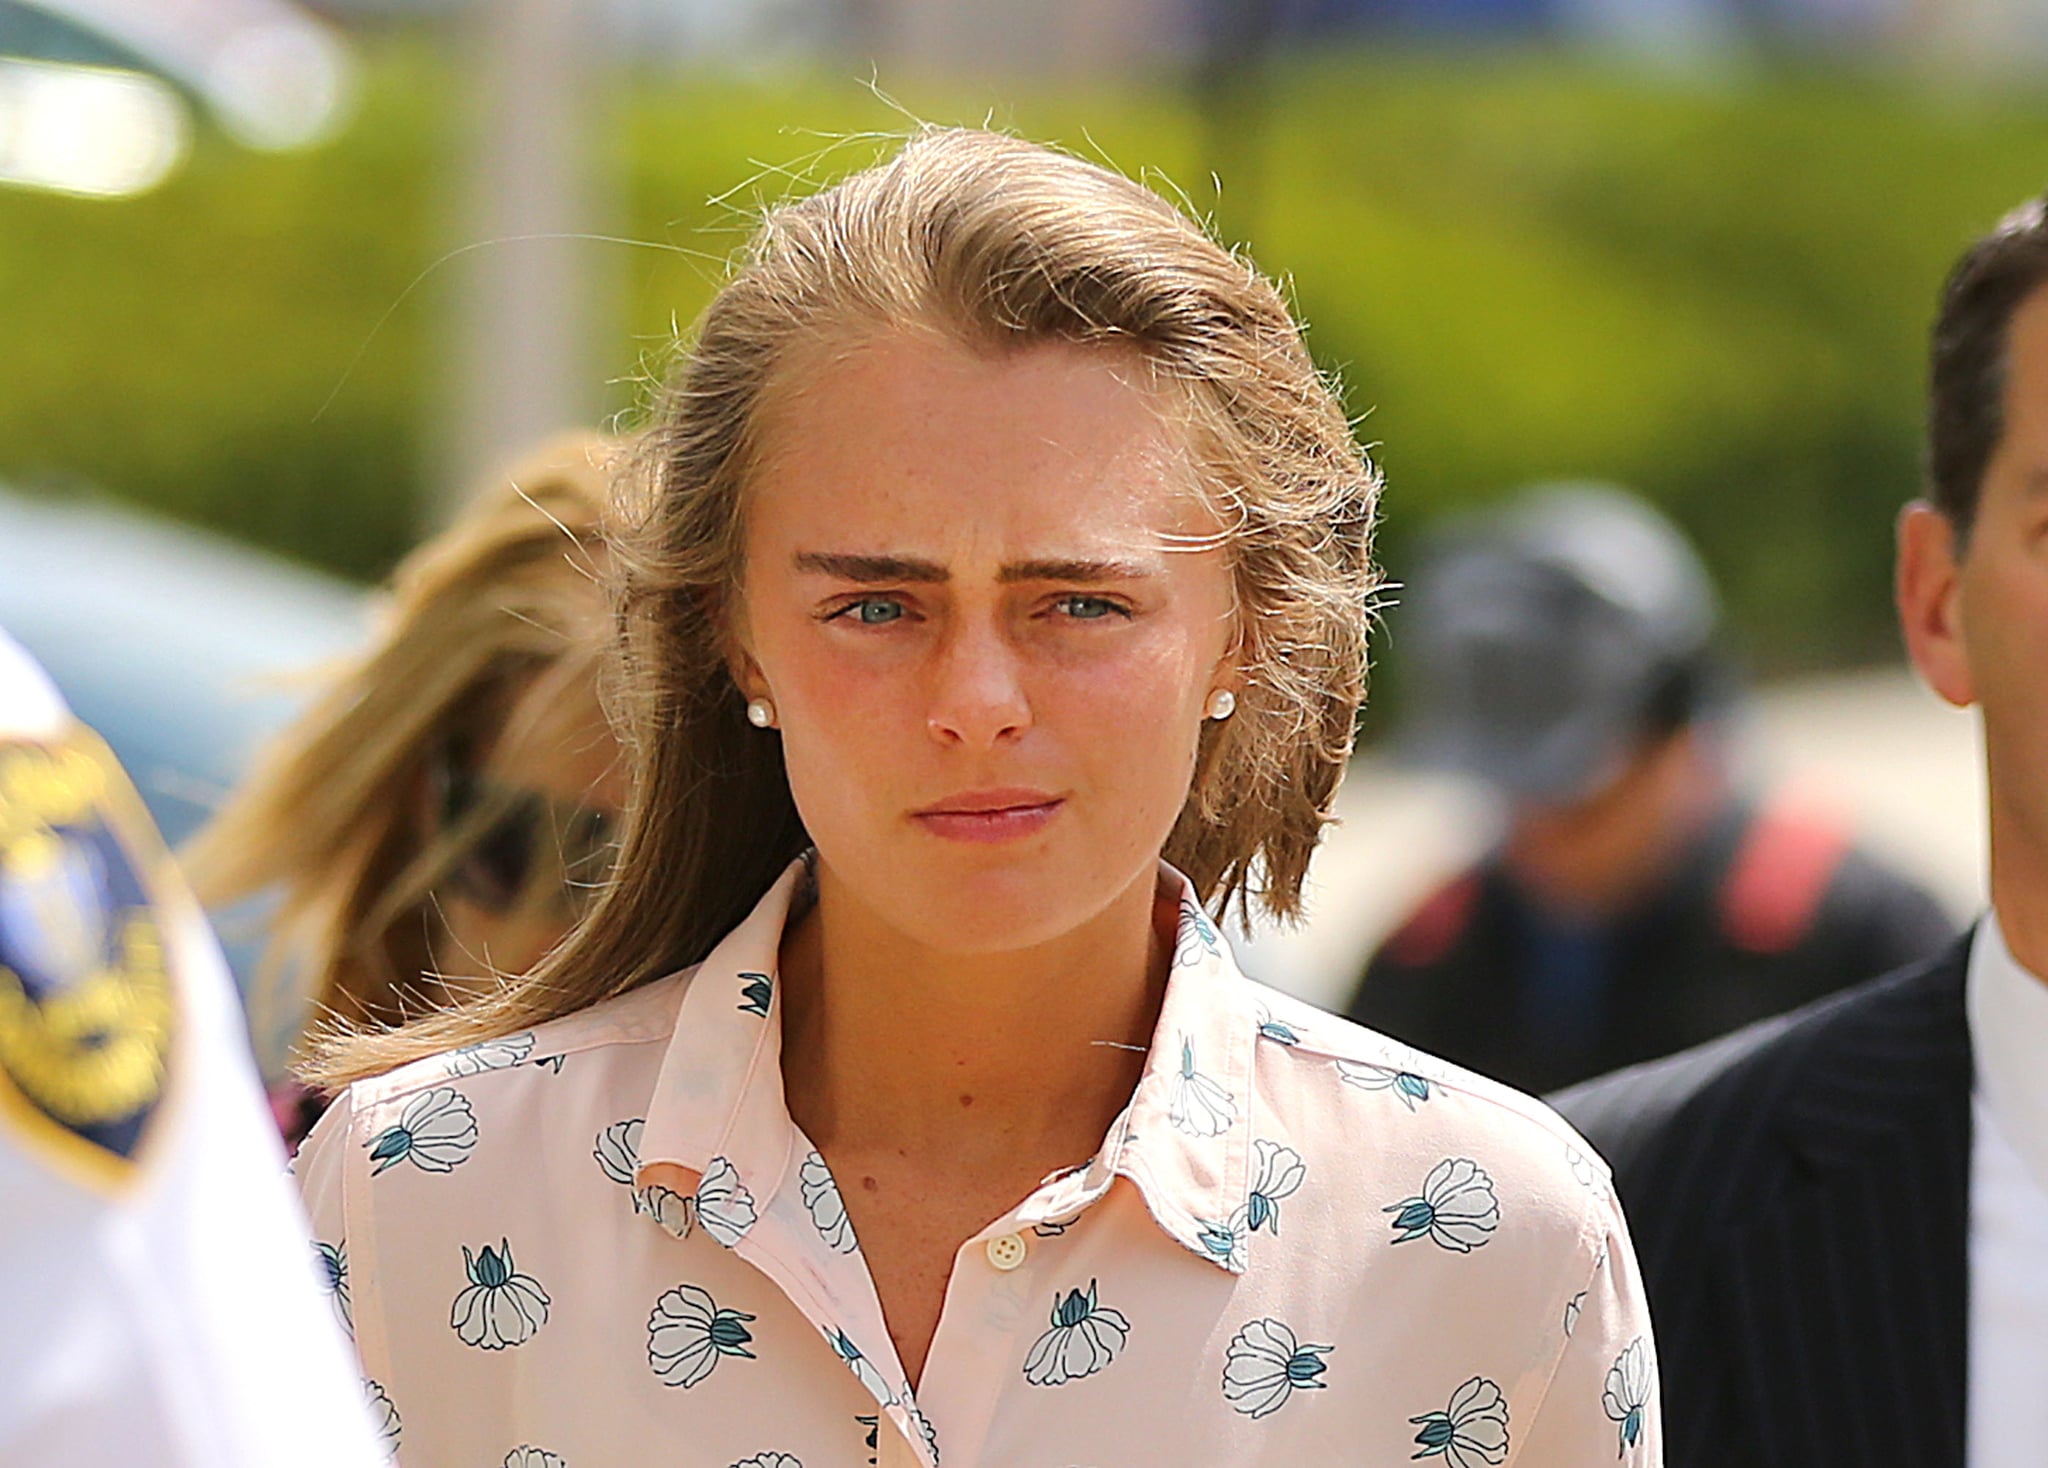 TAUNTON, MA - JUNE 16: Michelle Carter arrives at Taunton District Court in Taunton, MA on Jun. 16, 2017 to hear the verdict in her trial. Carter is charged with involuntary manslaughter for encourageing 18-year-old Conrad Roy III to kill himself in July 2014. (Photo by John Tlumacki/The Boston Globe via Getty Images)